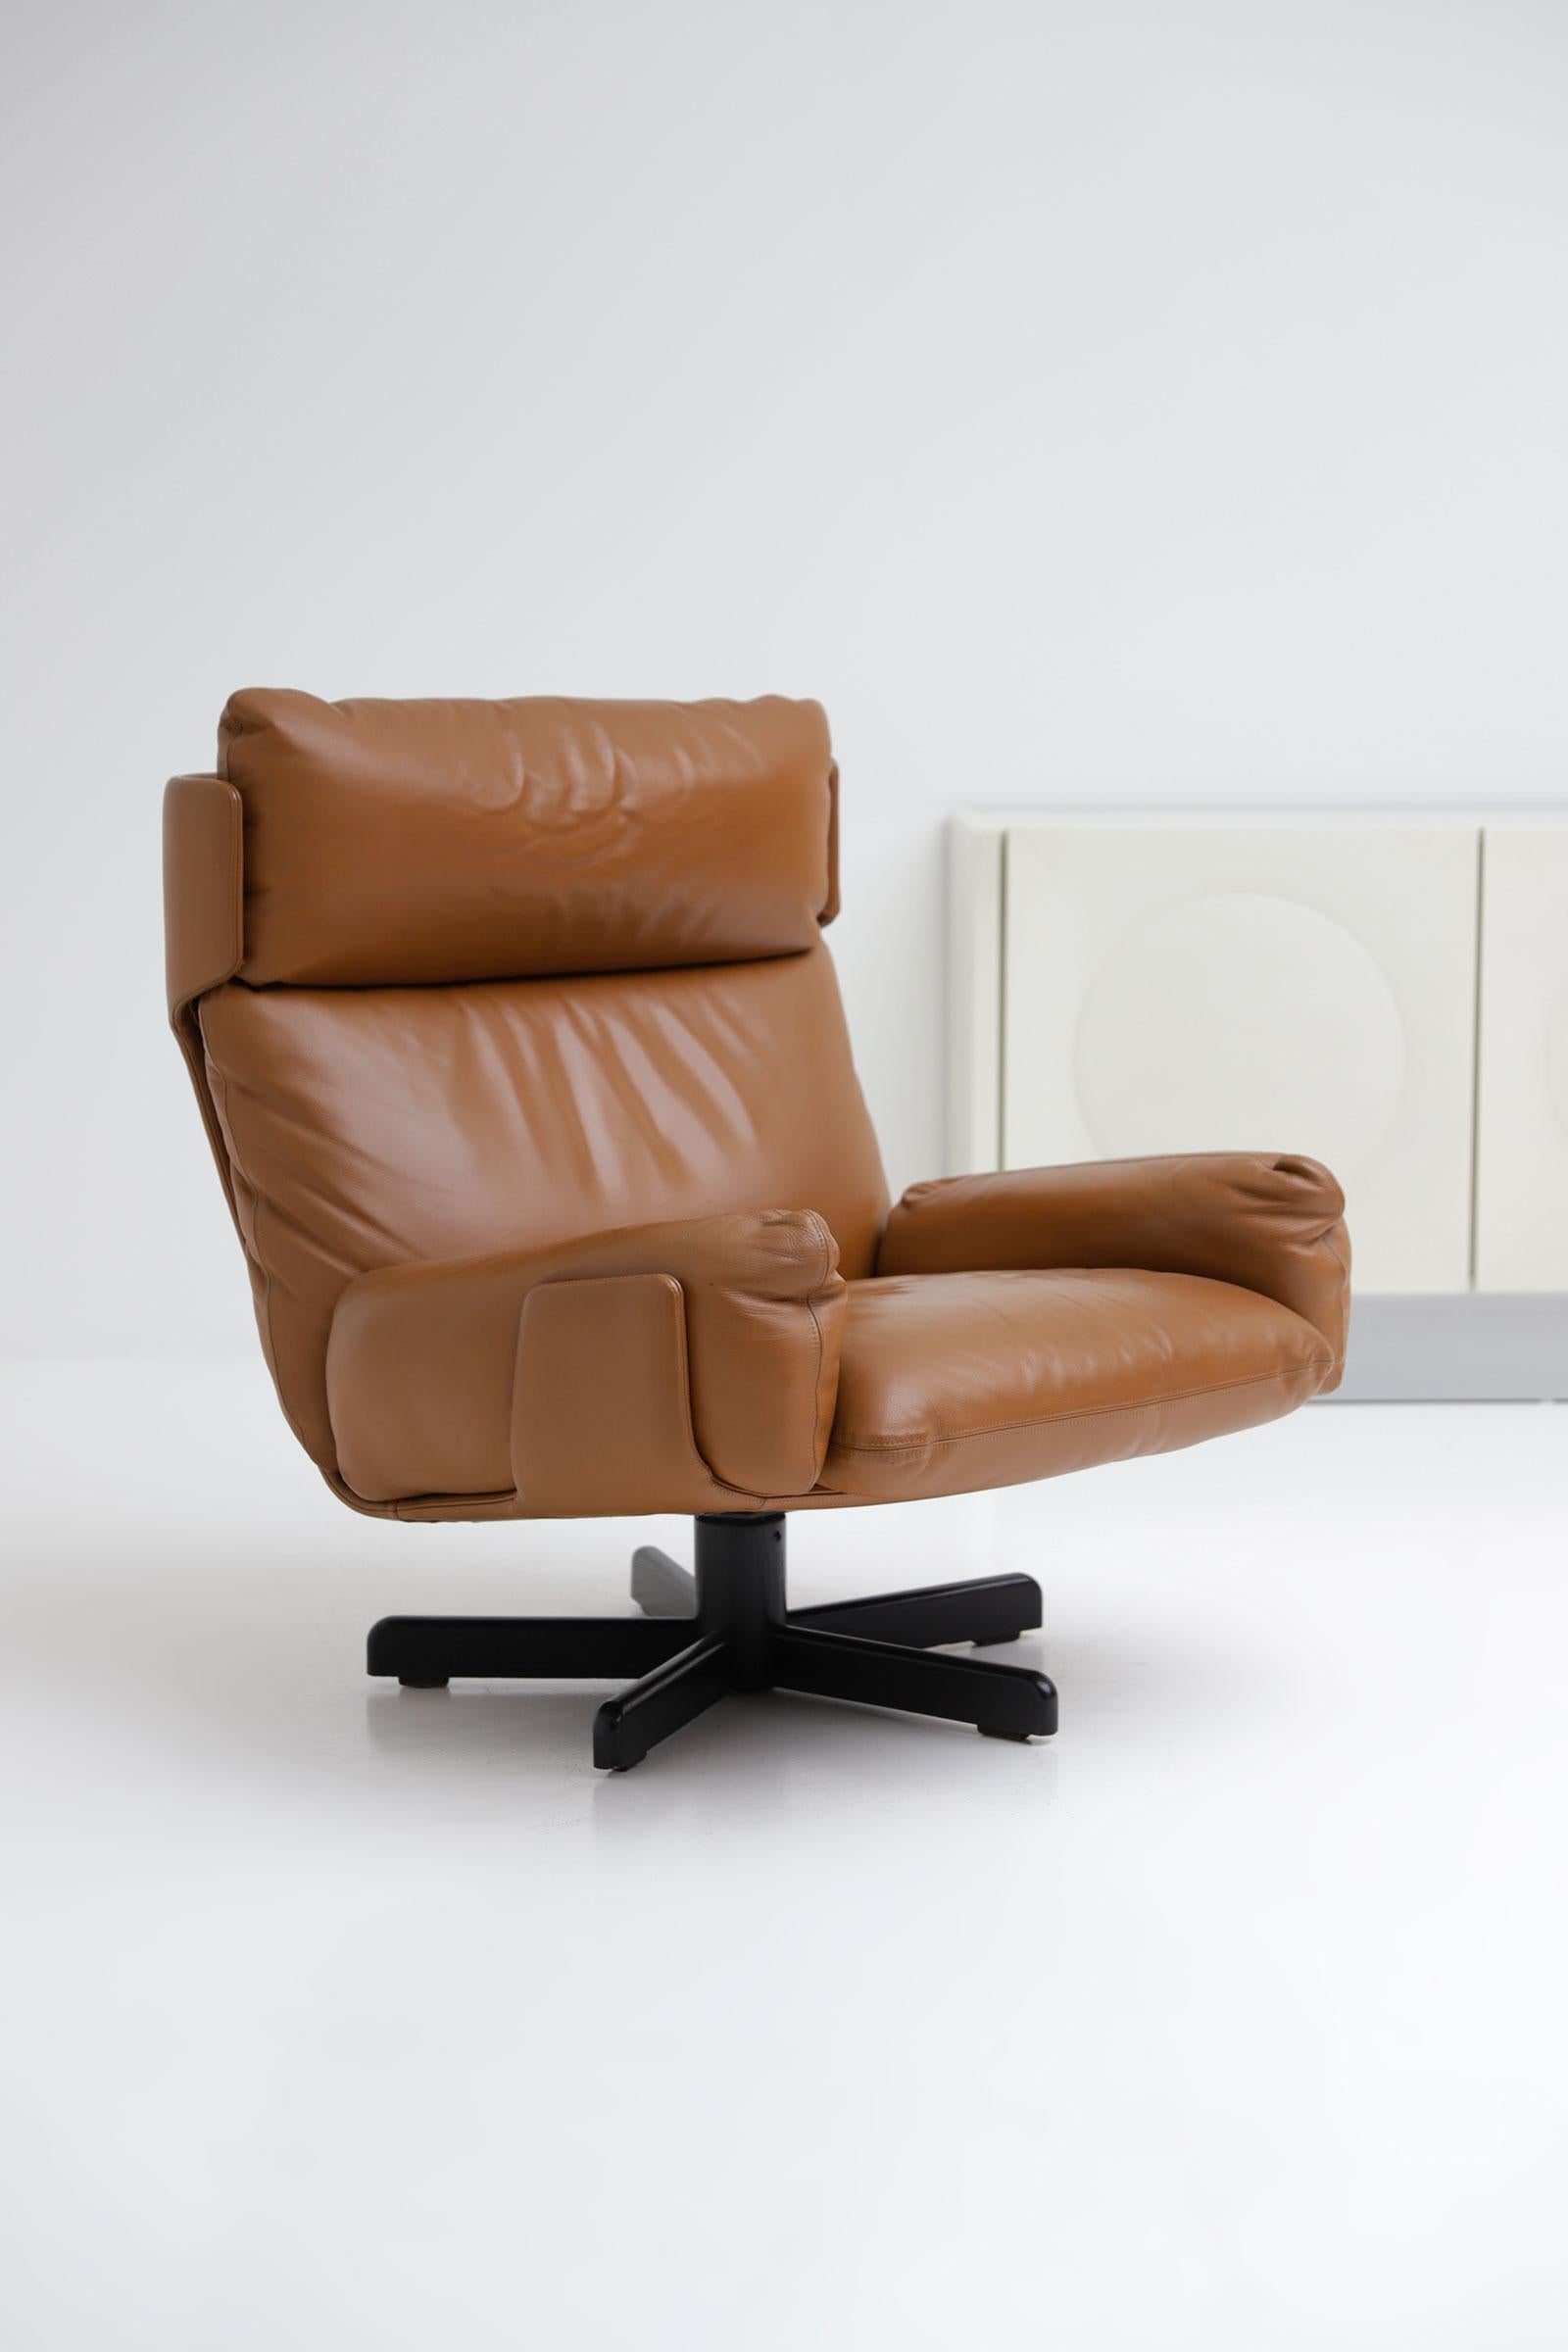 Modern Durlet Lounge Chair 1976 Heiner Golz with Wood Base and Leather Seat For Sale